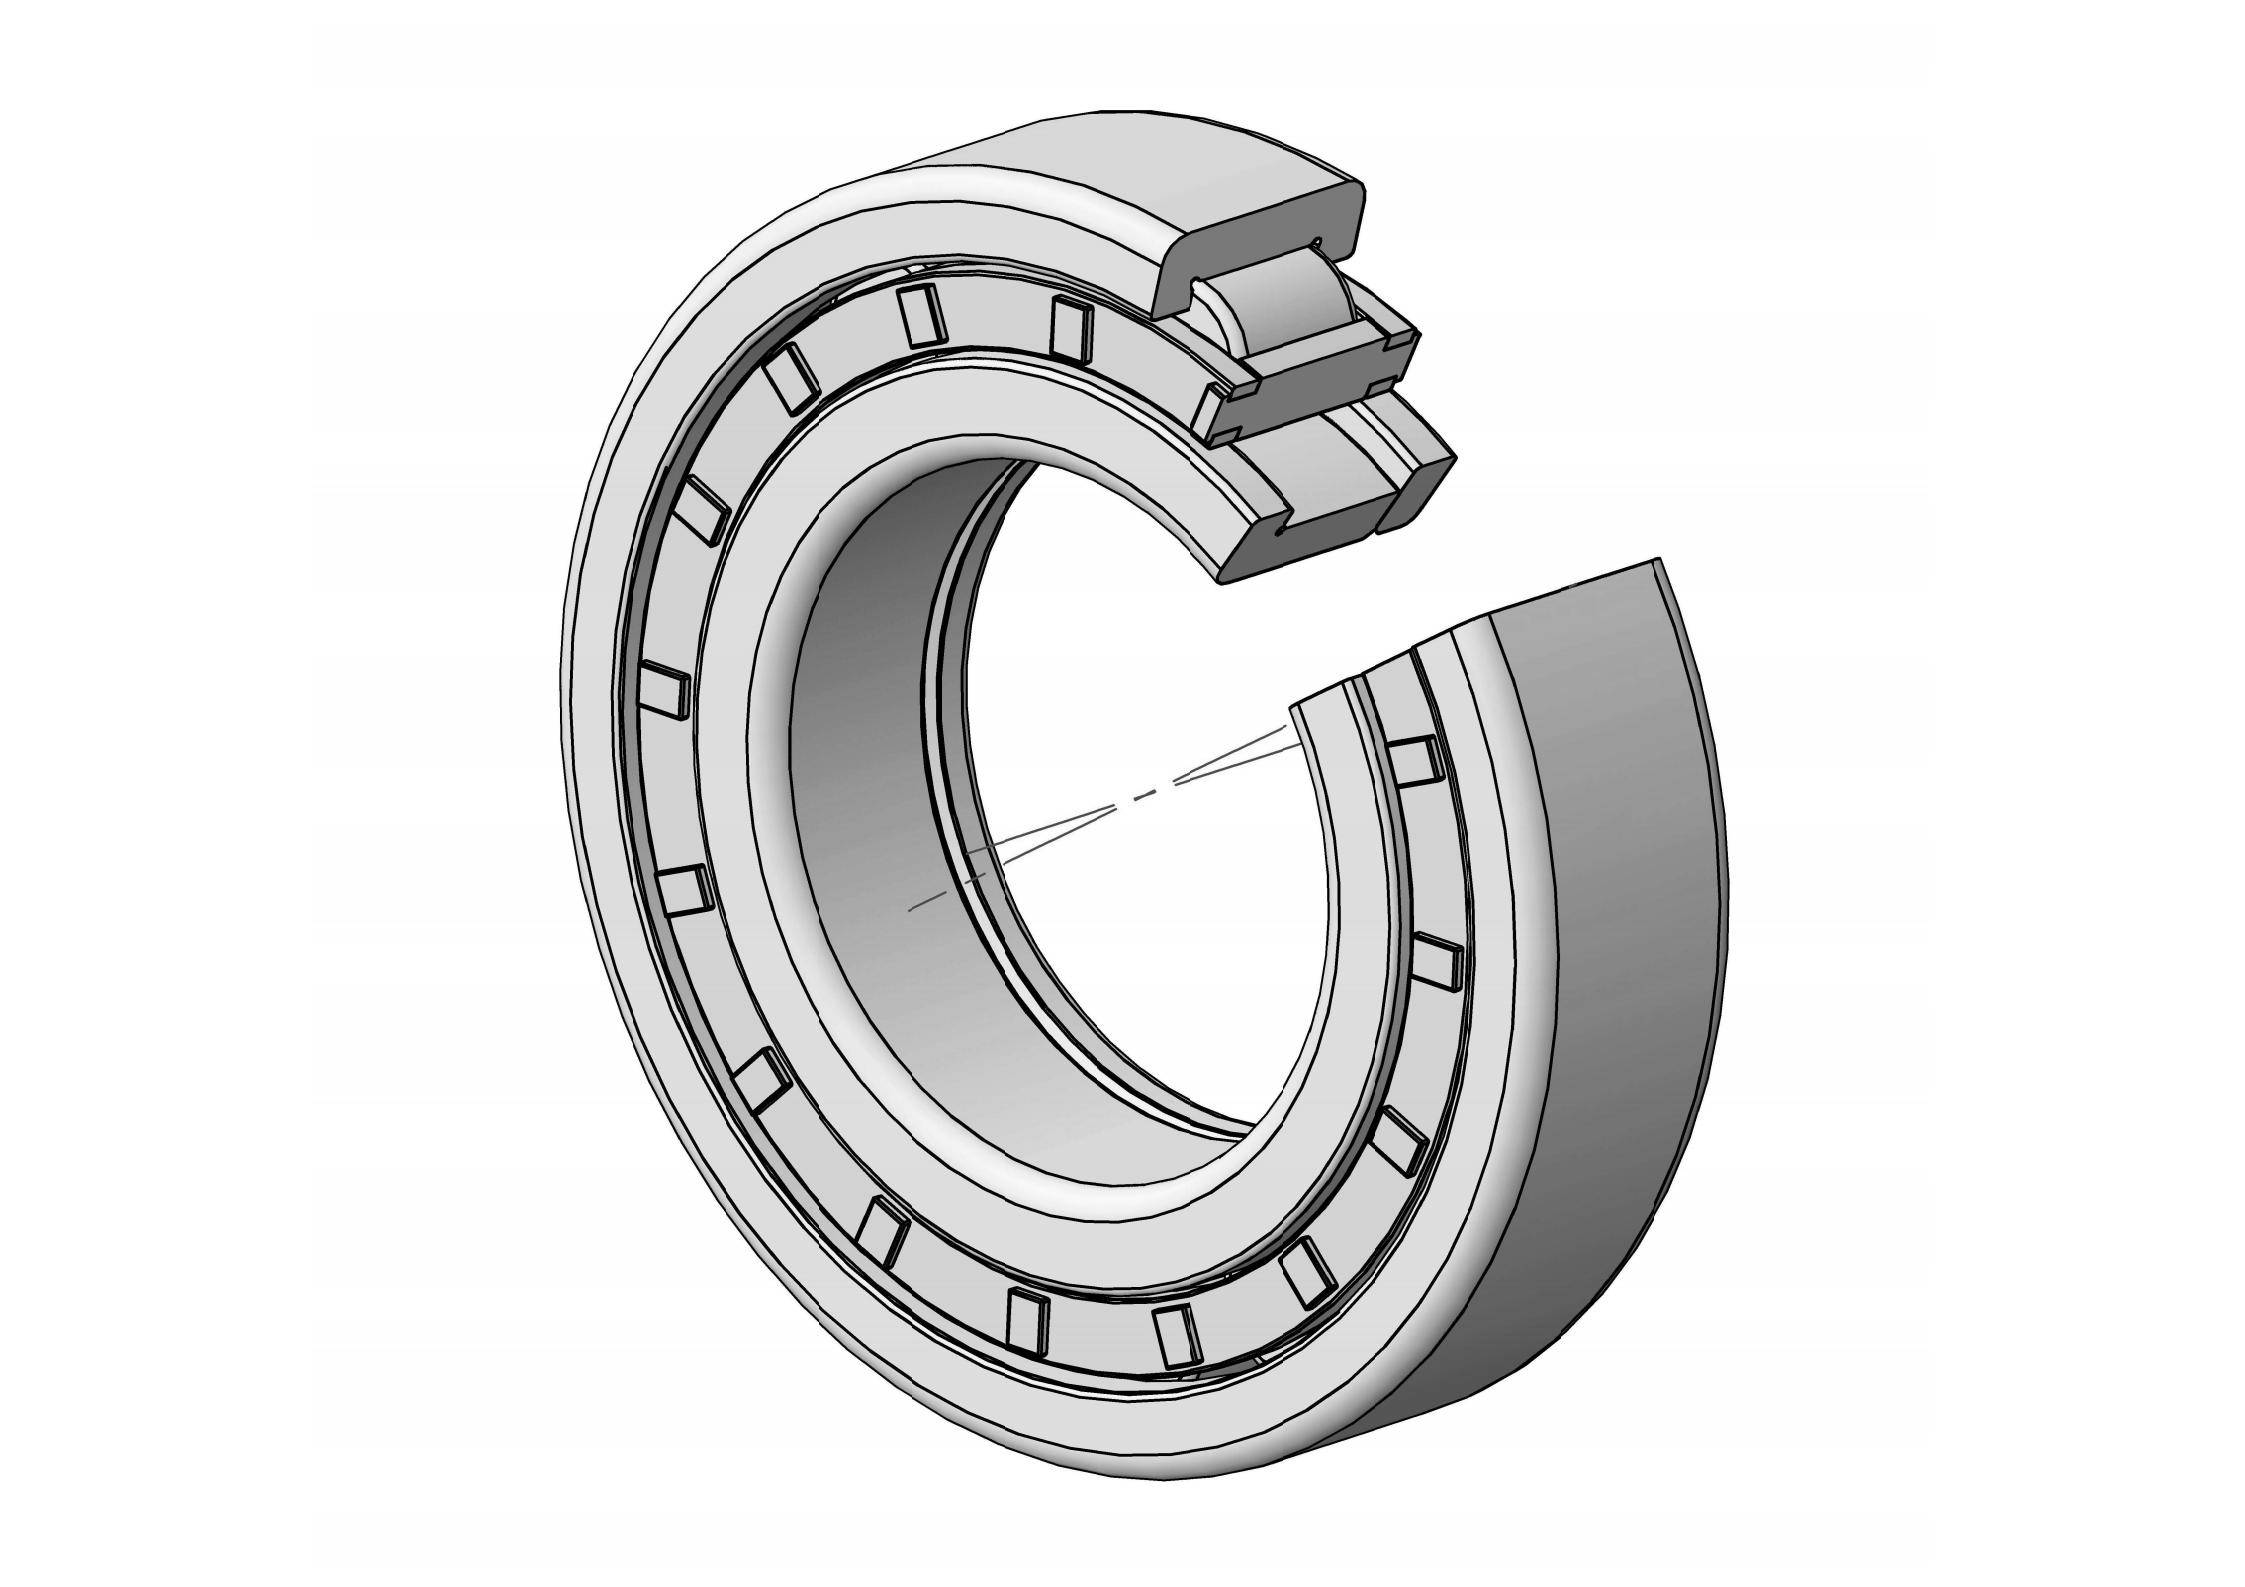 NUP2218-EM Single Row Cylindrical roller bearing 